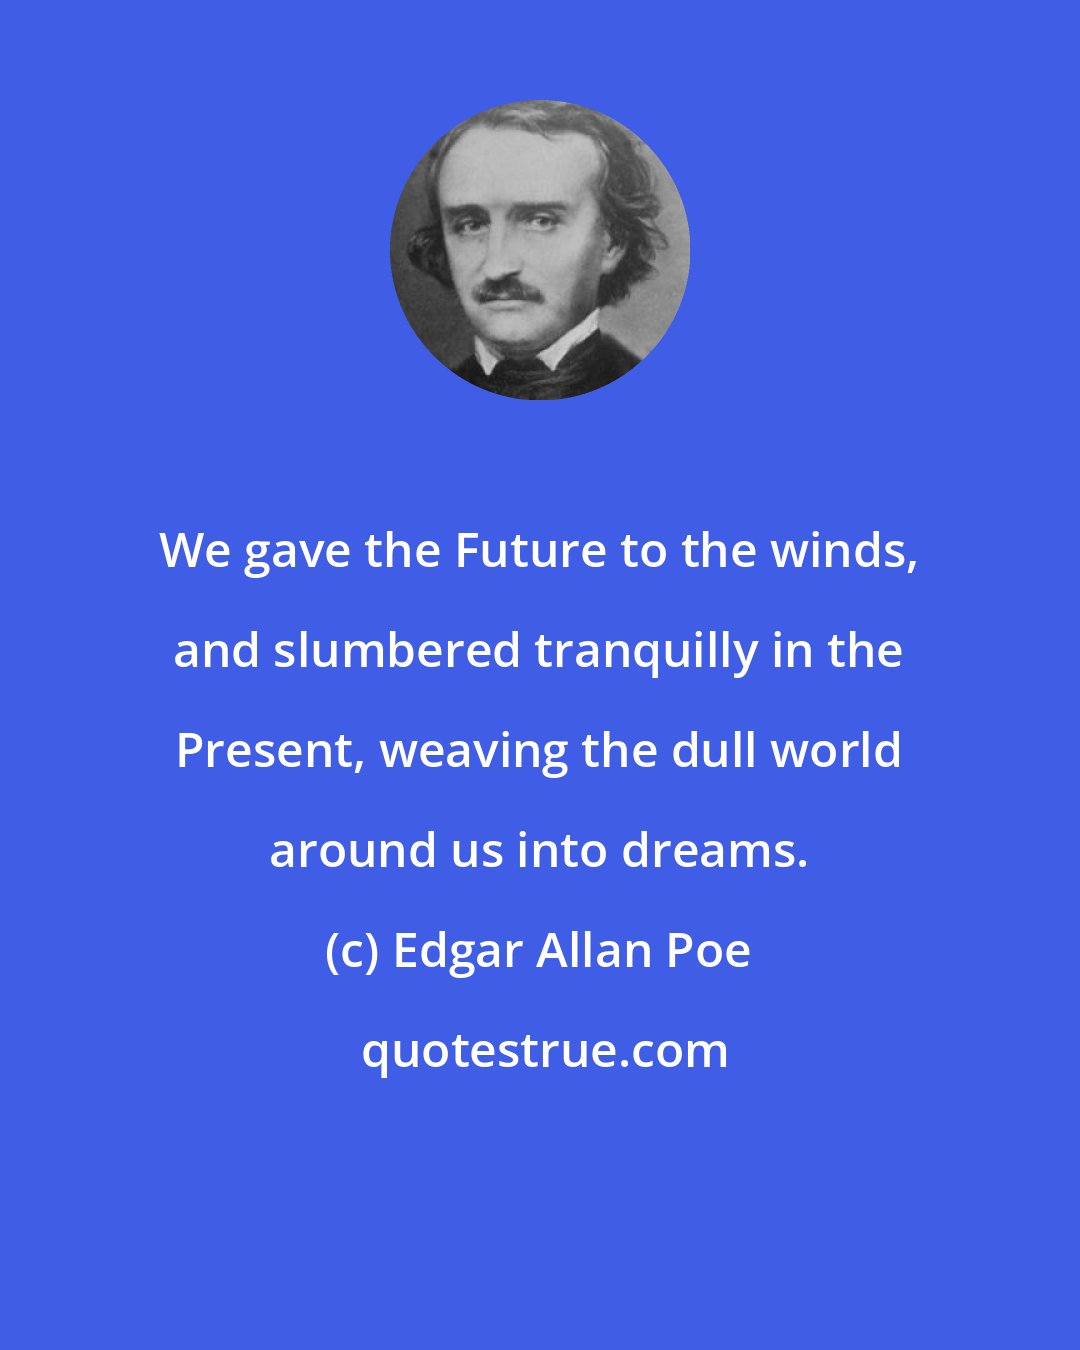 Edgar Allan Poe: We gave the Future to the winds, and slumbered tranquilly in the Present, weaving the dull world around us into dreams.